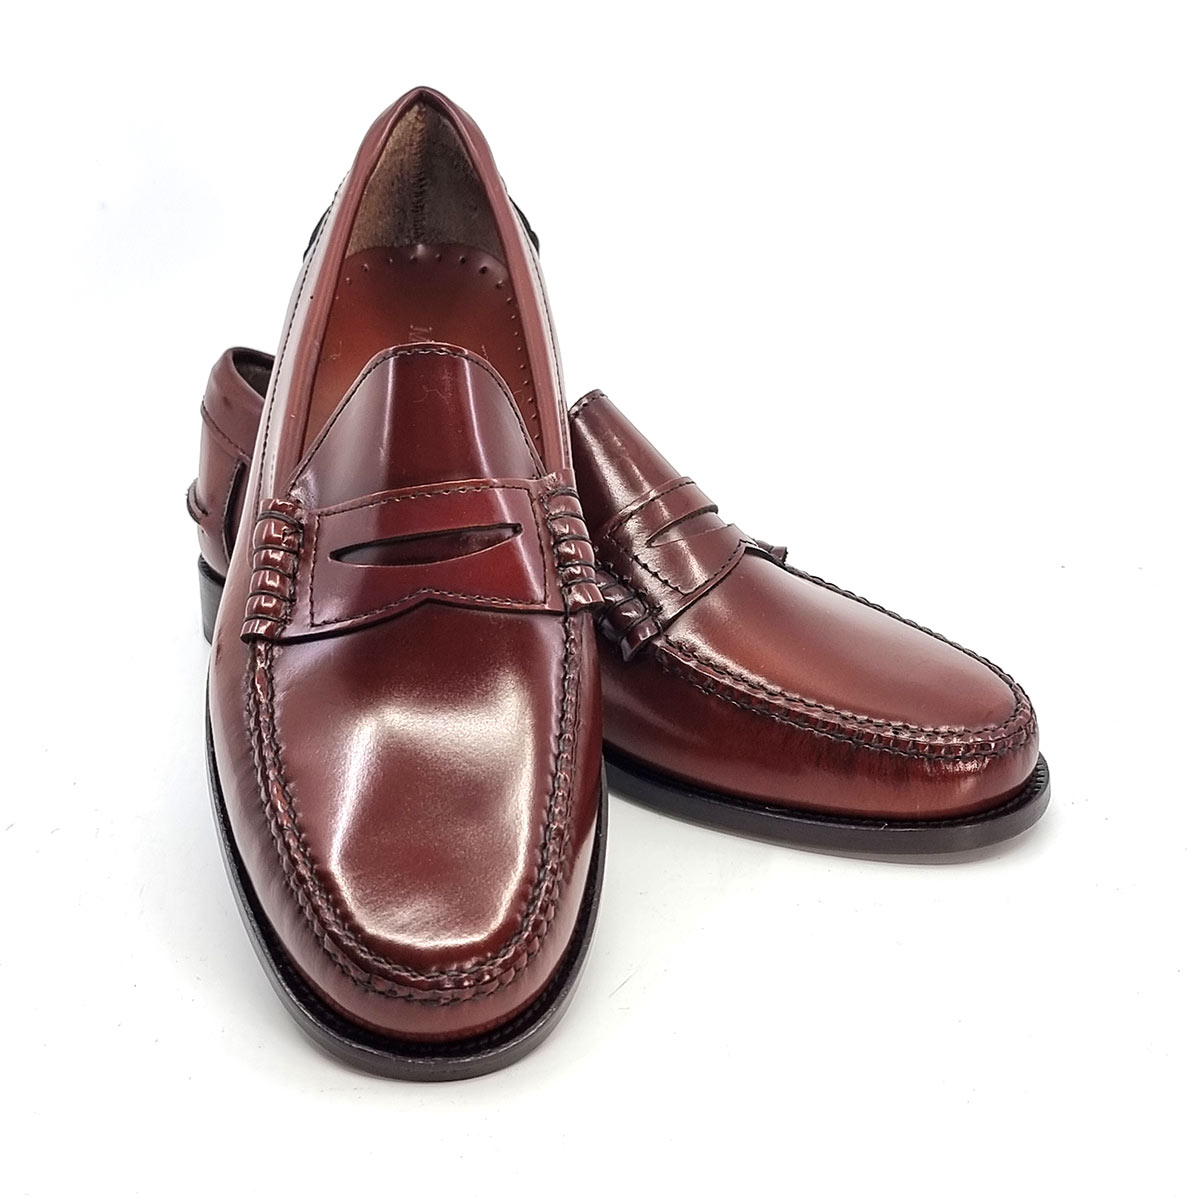 Chestnut Penny Loafers – The Earl By Modshoes – Mod Shoes